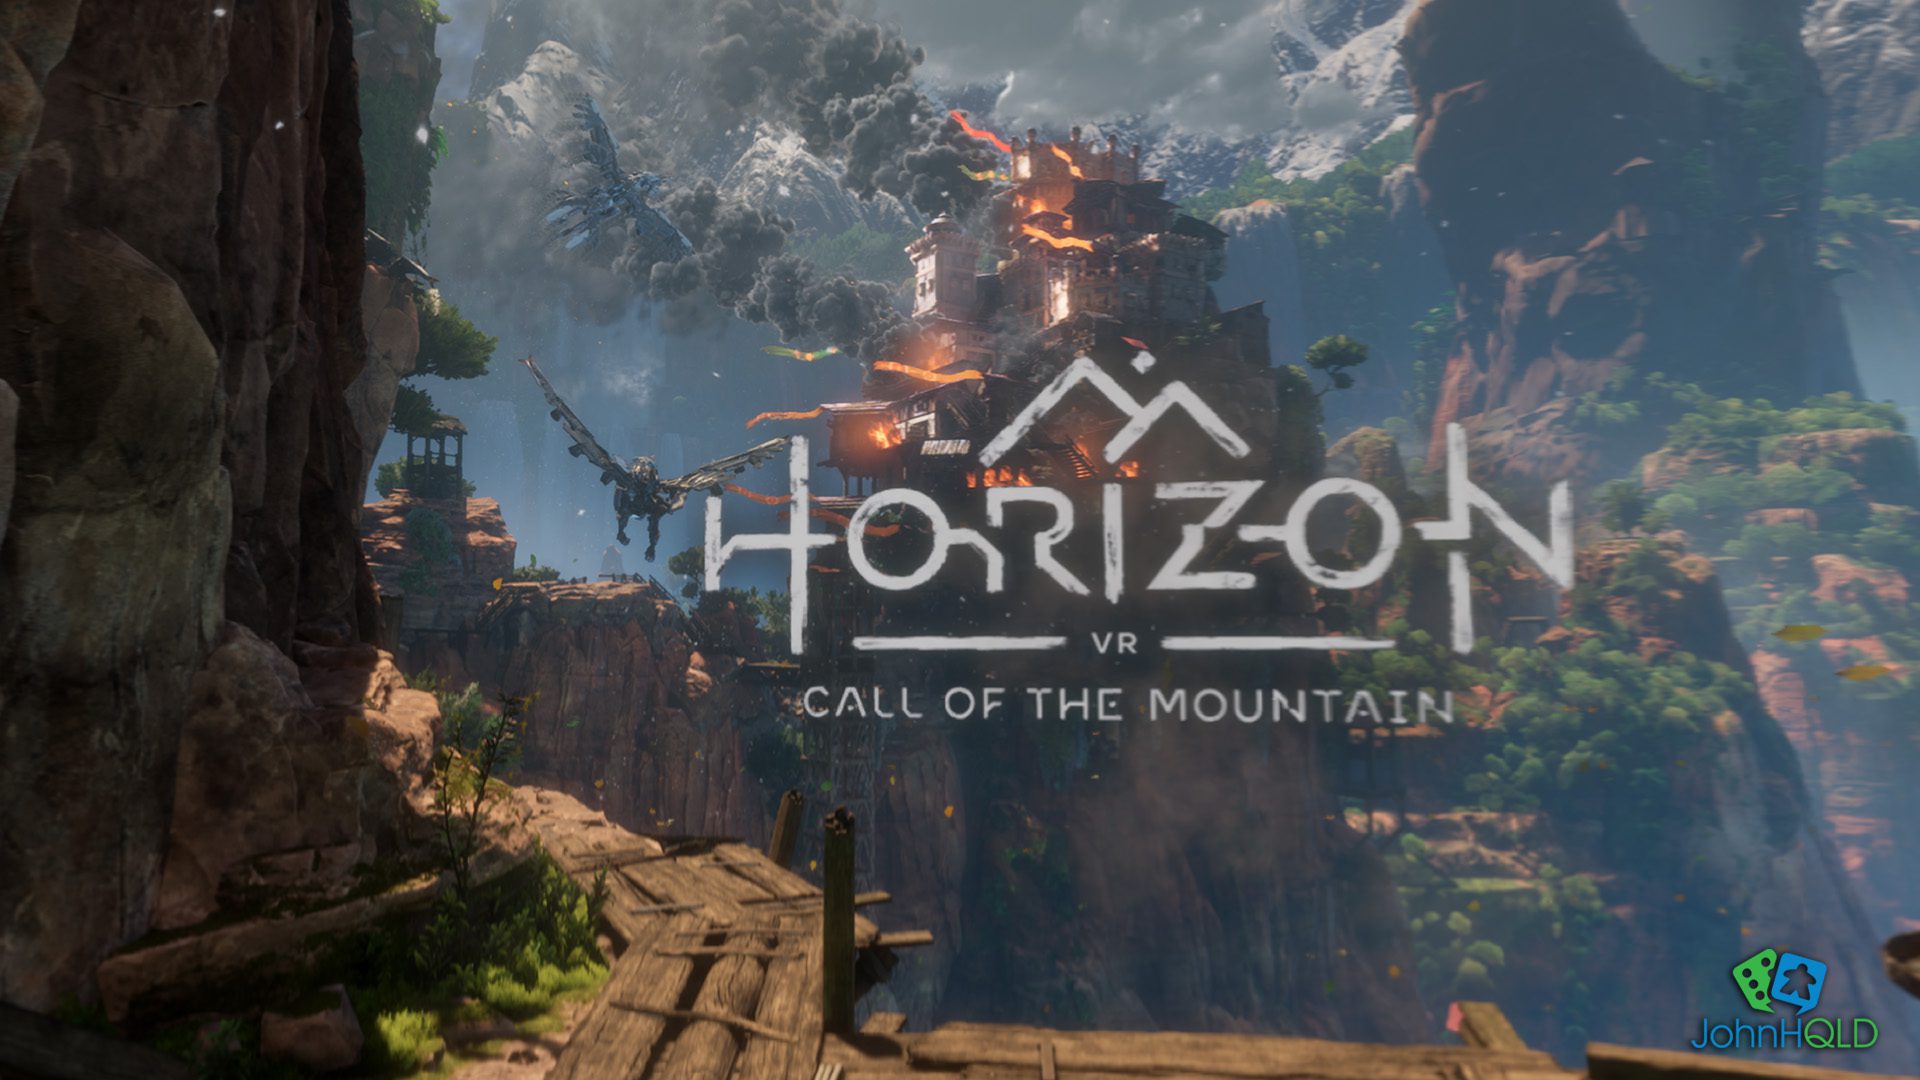 20230301 - Horizon VR - I dont know about 100 dollars worth of fun